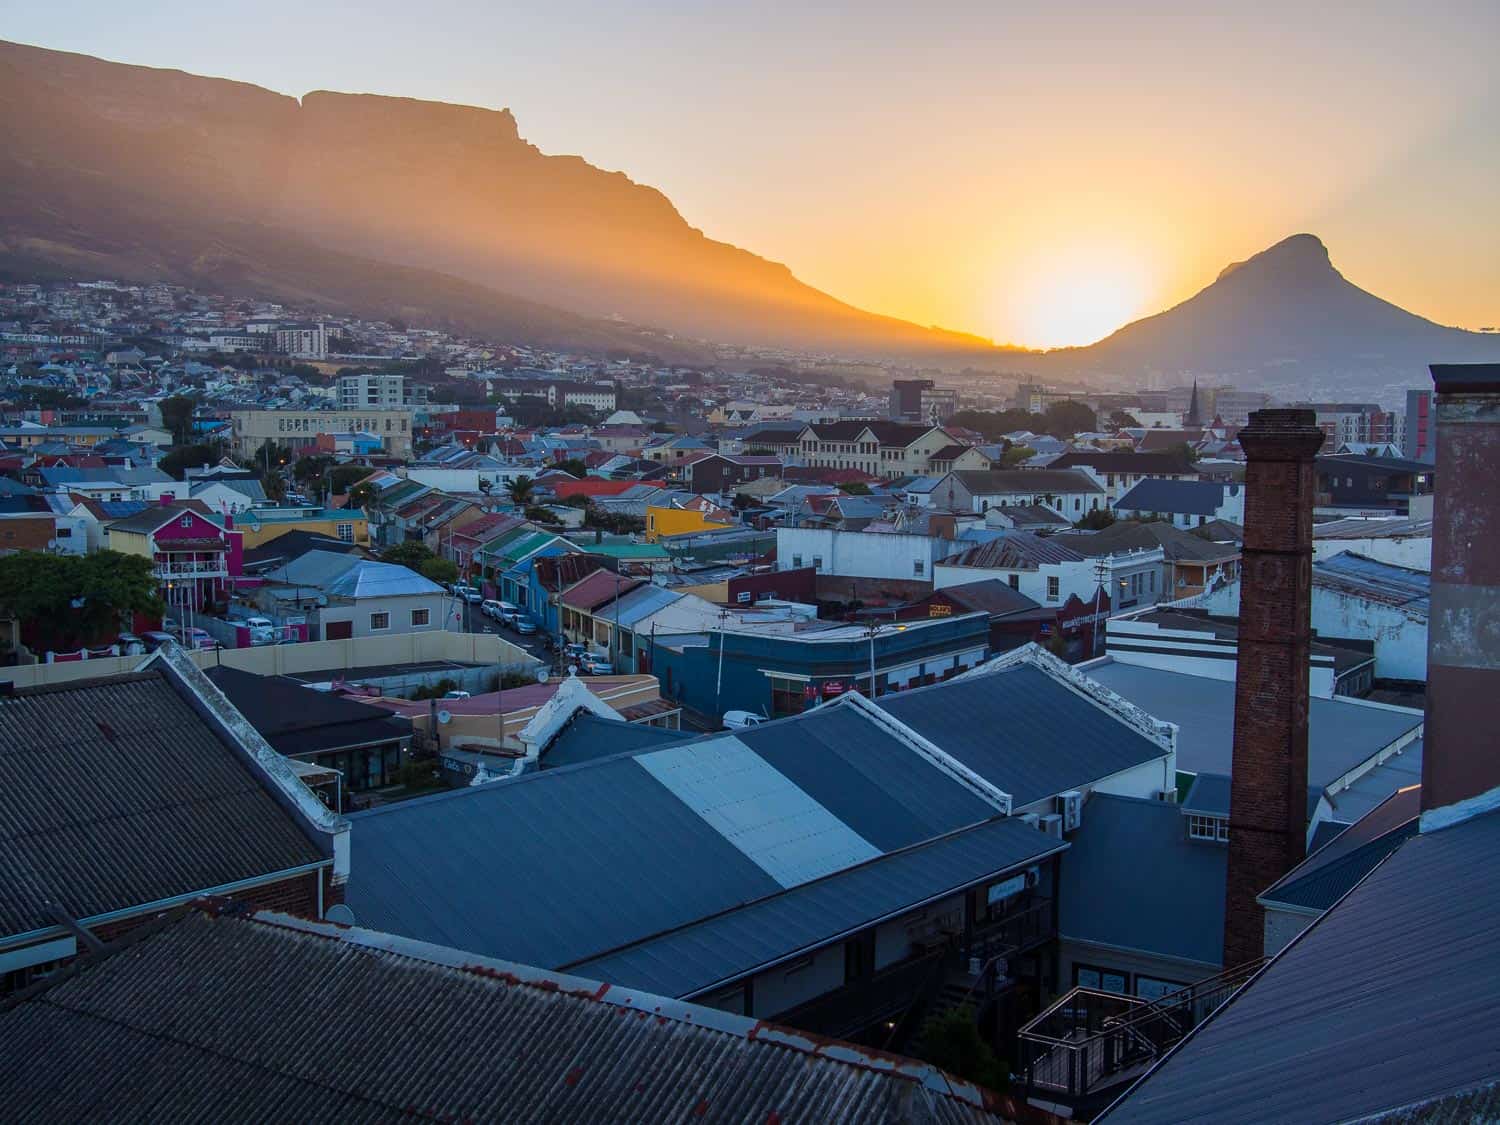 The view of Table Mountain and Lion's Head from The Pot Luck Club at sunset